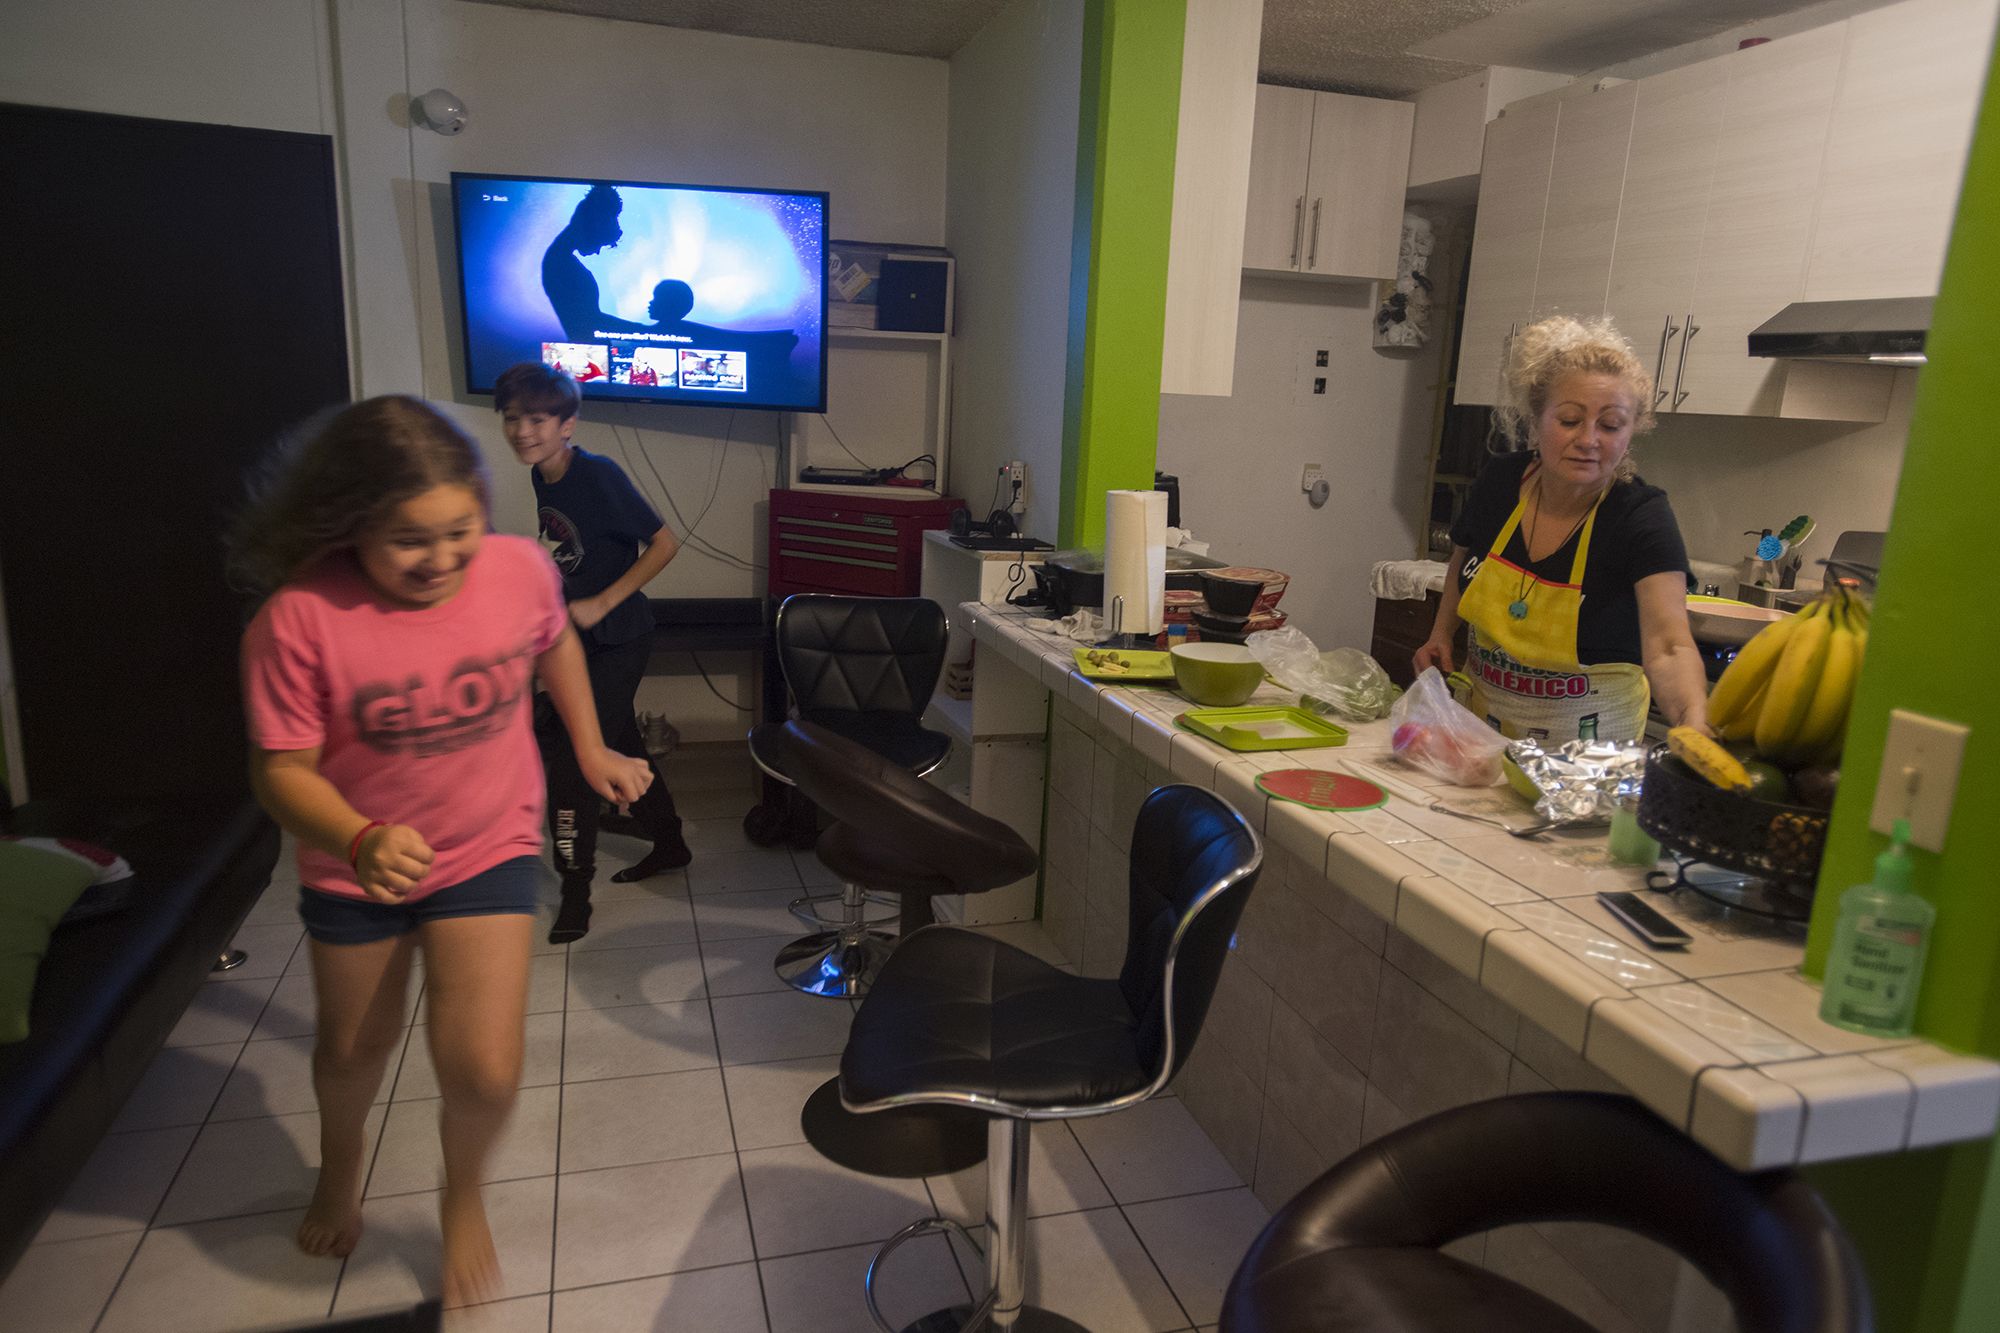 Rayma Flores, from left, and Edward get restless before dinner as their mother, Enedis, prepares the Thanksgiving feast on Nov. 28. When they are in Tijuana, the kids spend most of their time in the two-bedroom, one-bath apartment. Image by Amanda Cowan. Mexico, 2019.